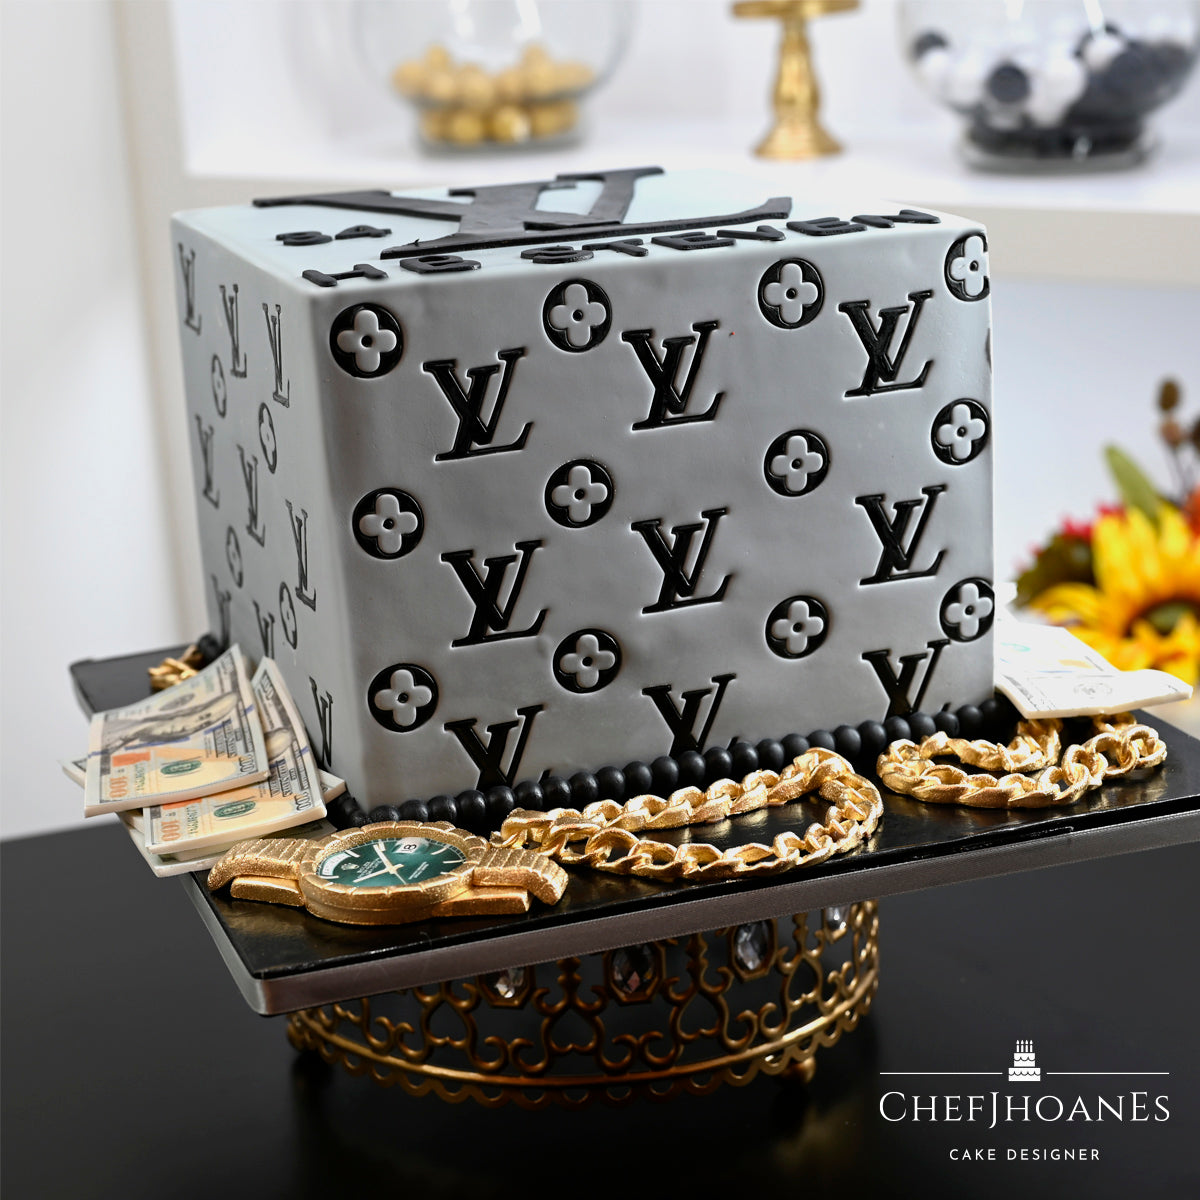 Louis Vuitton cake. Feed 20 people – Chefjhoanes